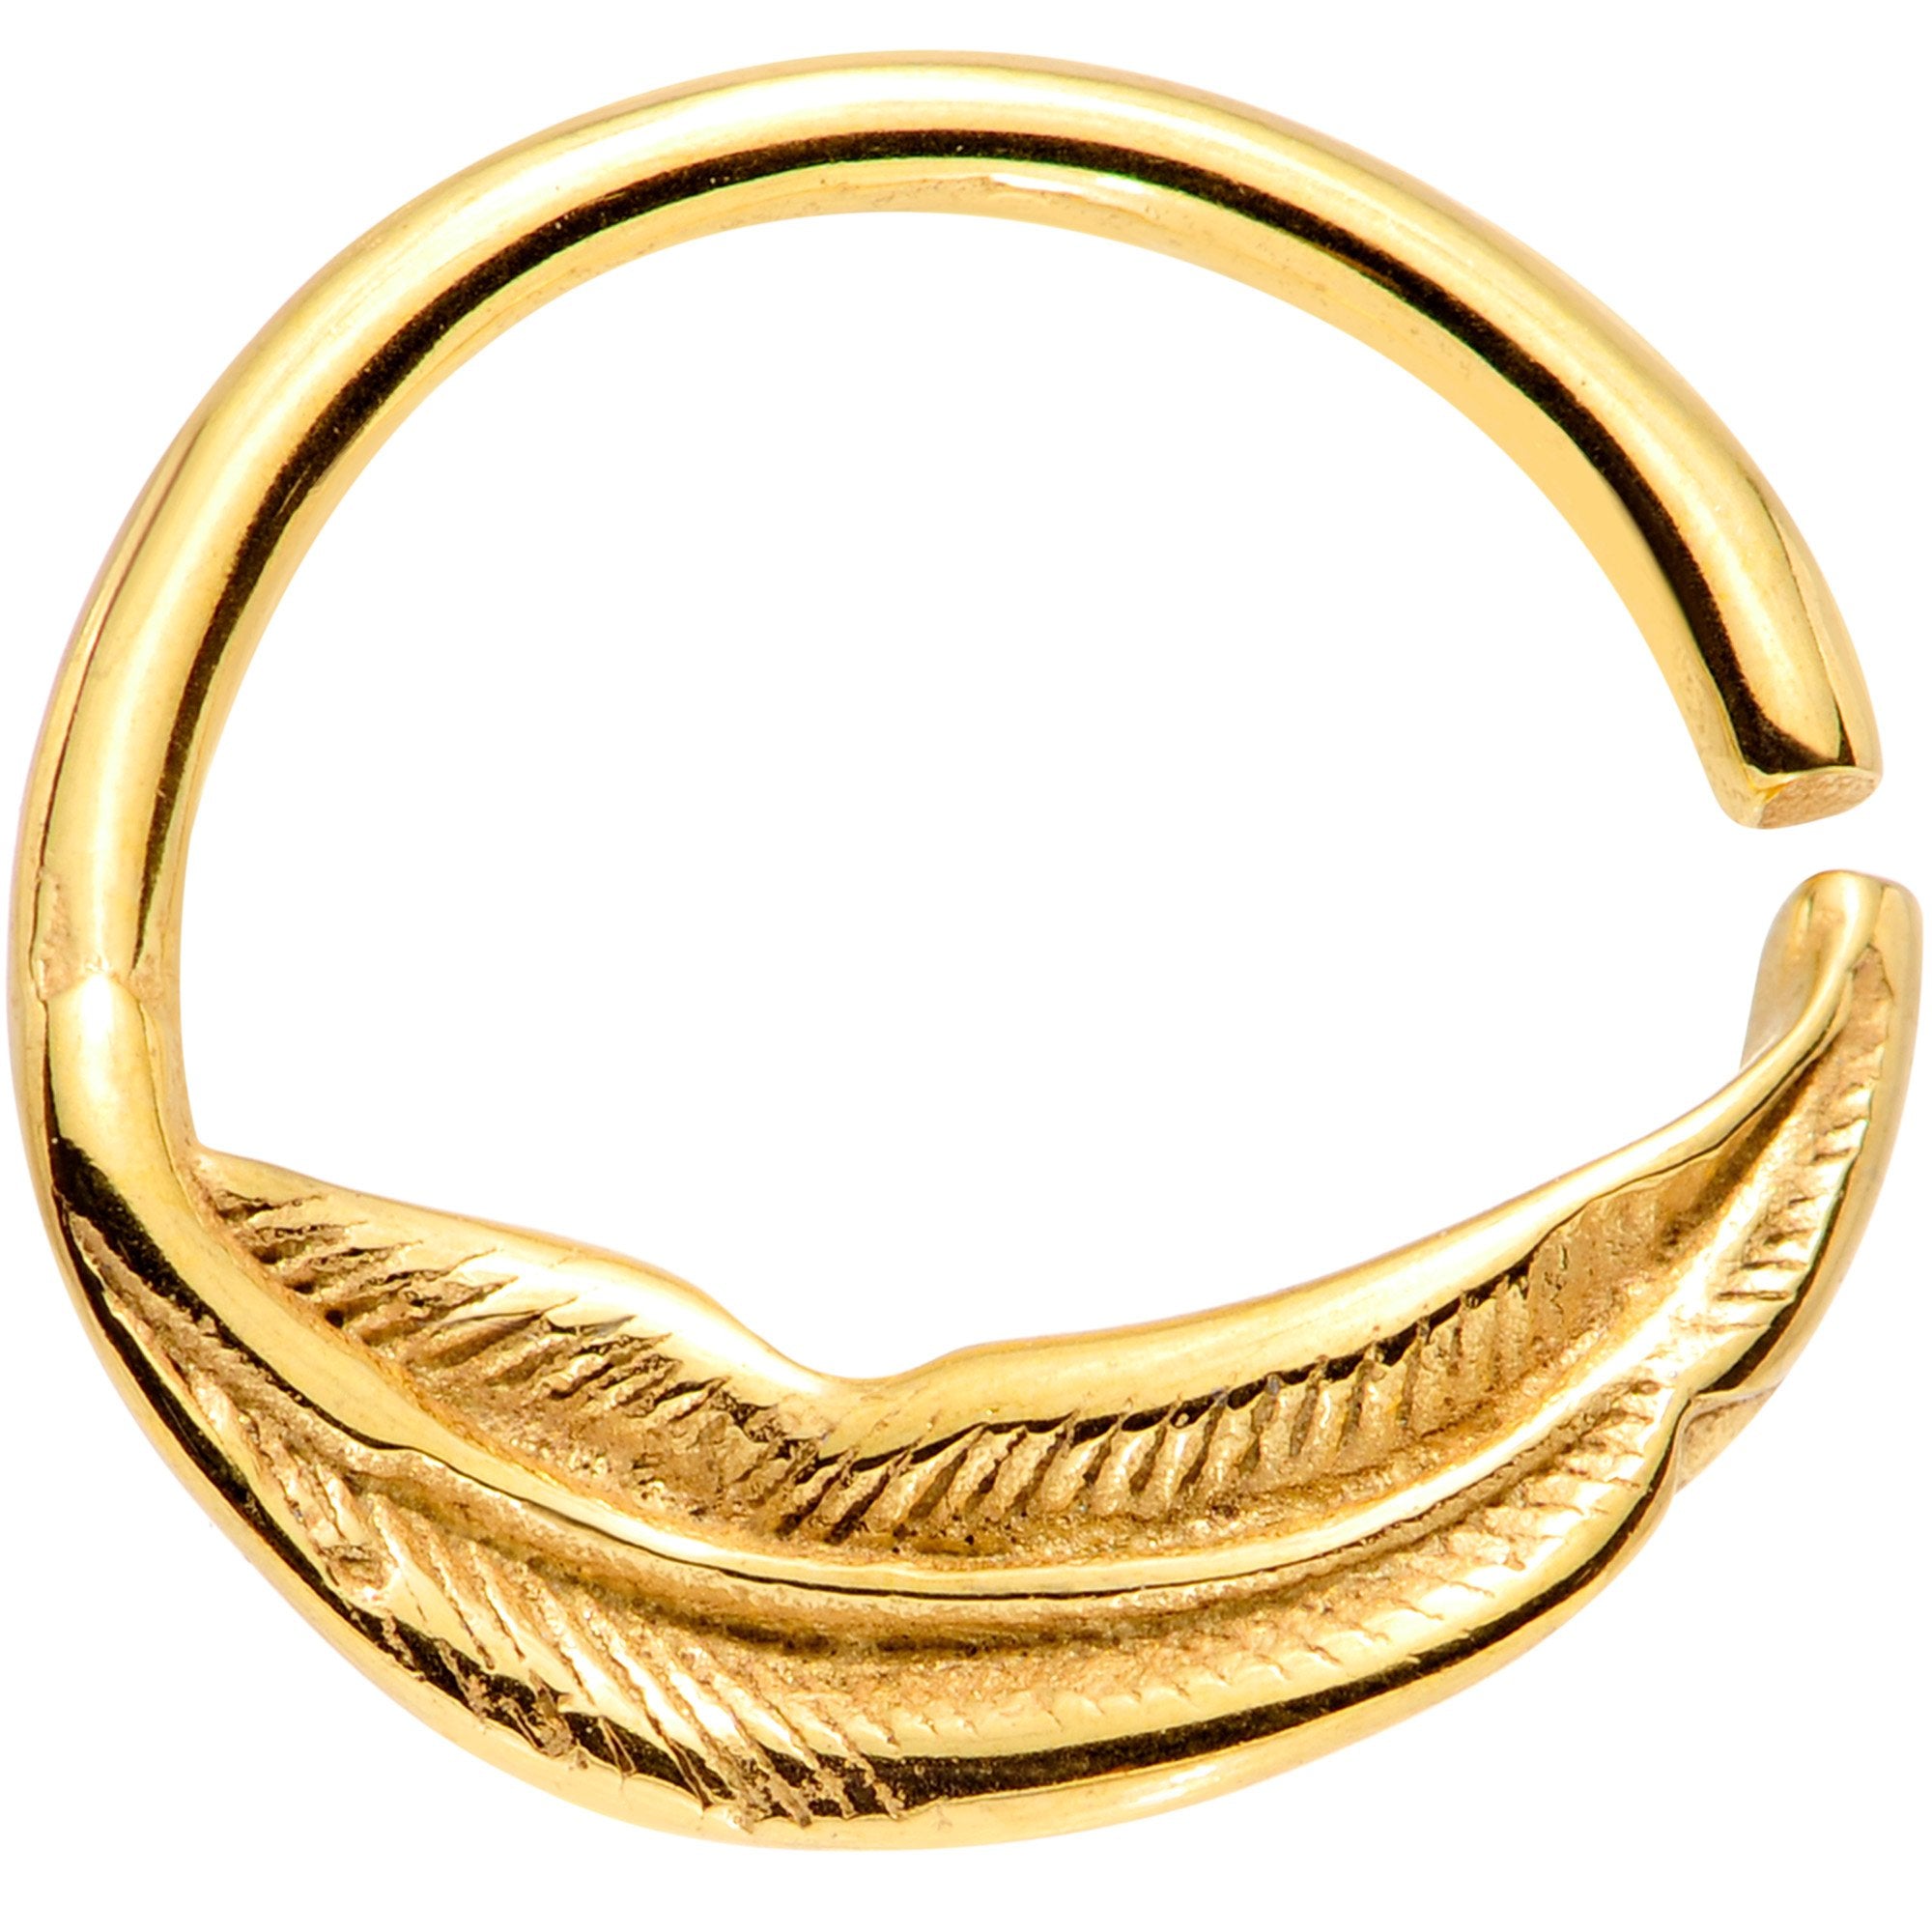 16 Gauge 3/8 Gold Tone Feather Closure Ring